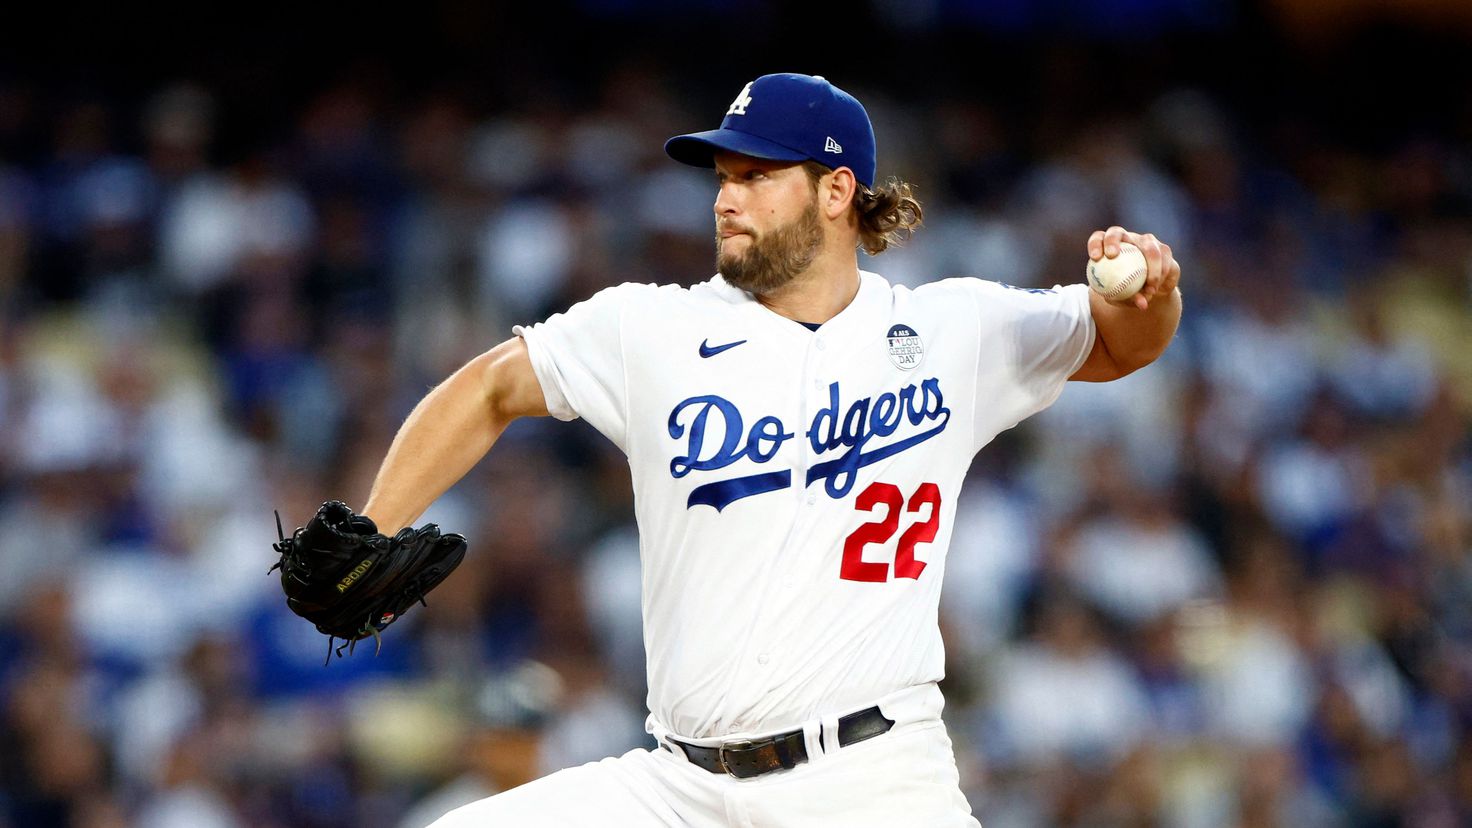 Clayton Kershaw's incredible record in the Major Leagues
